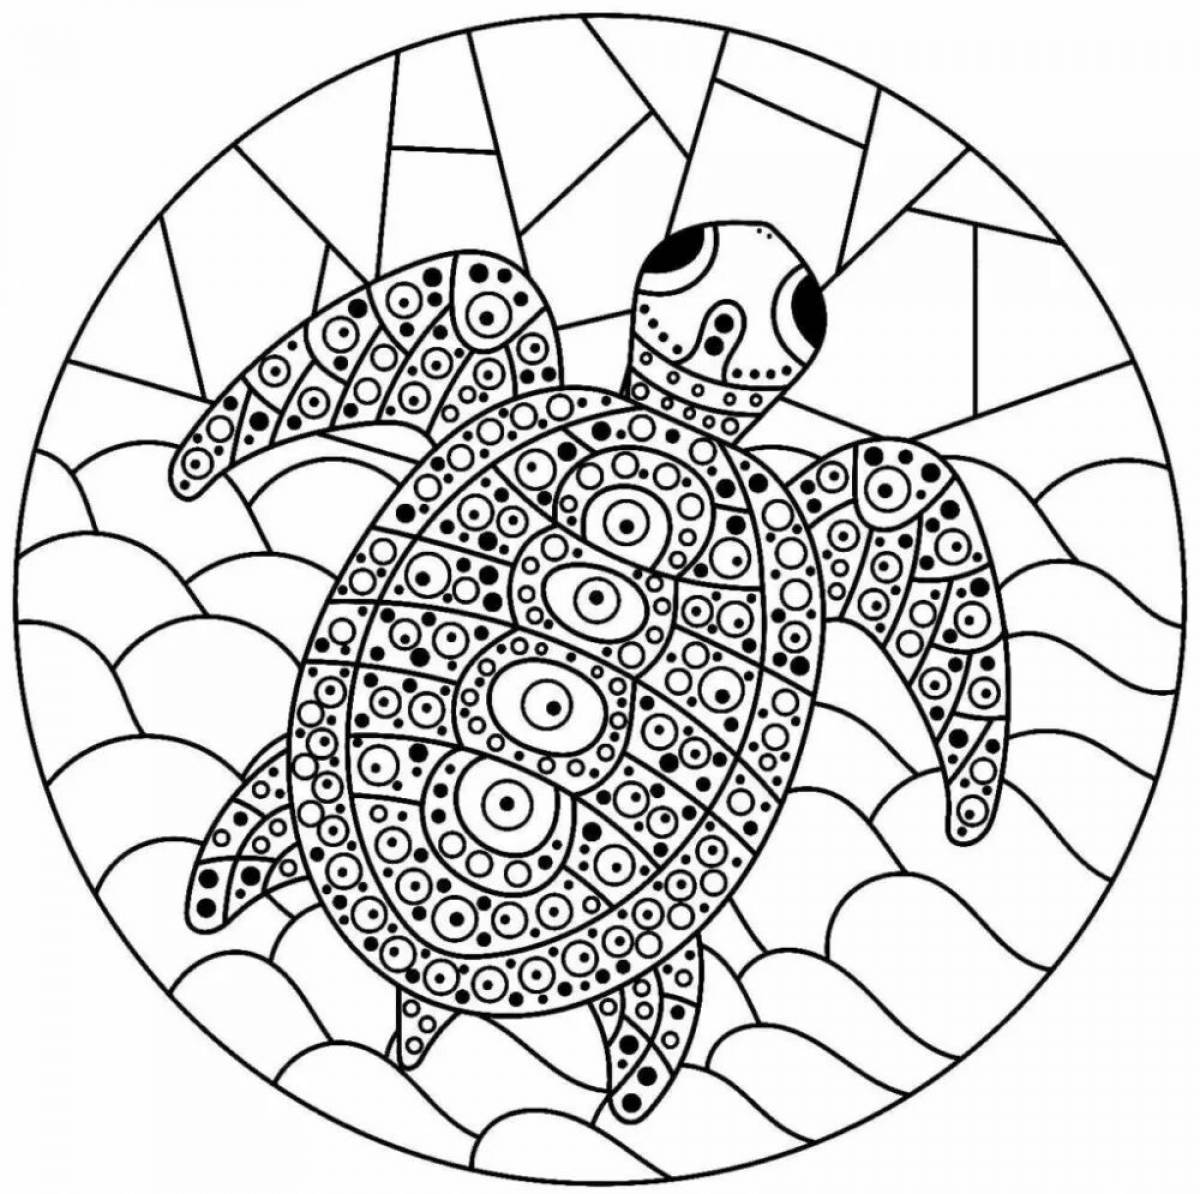 Great anti-stress turtle coloring book